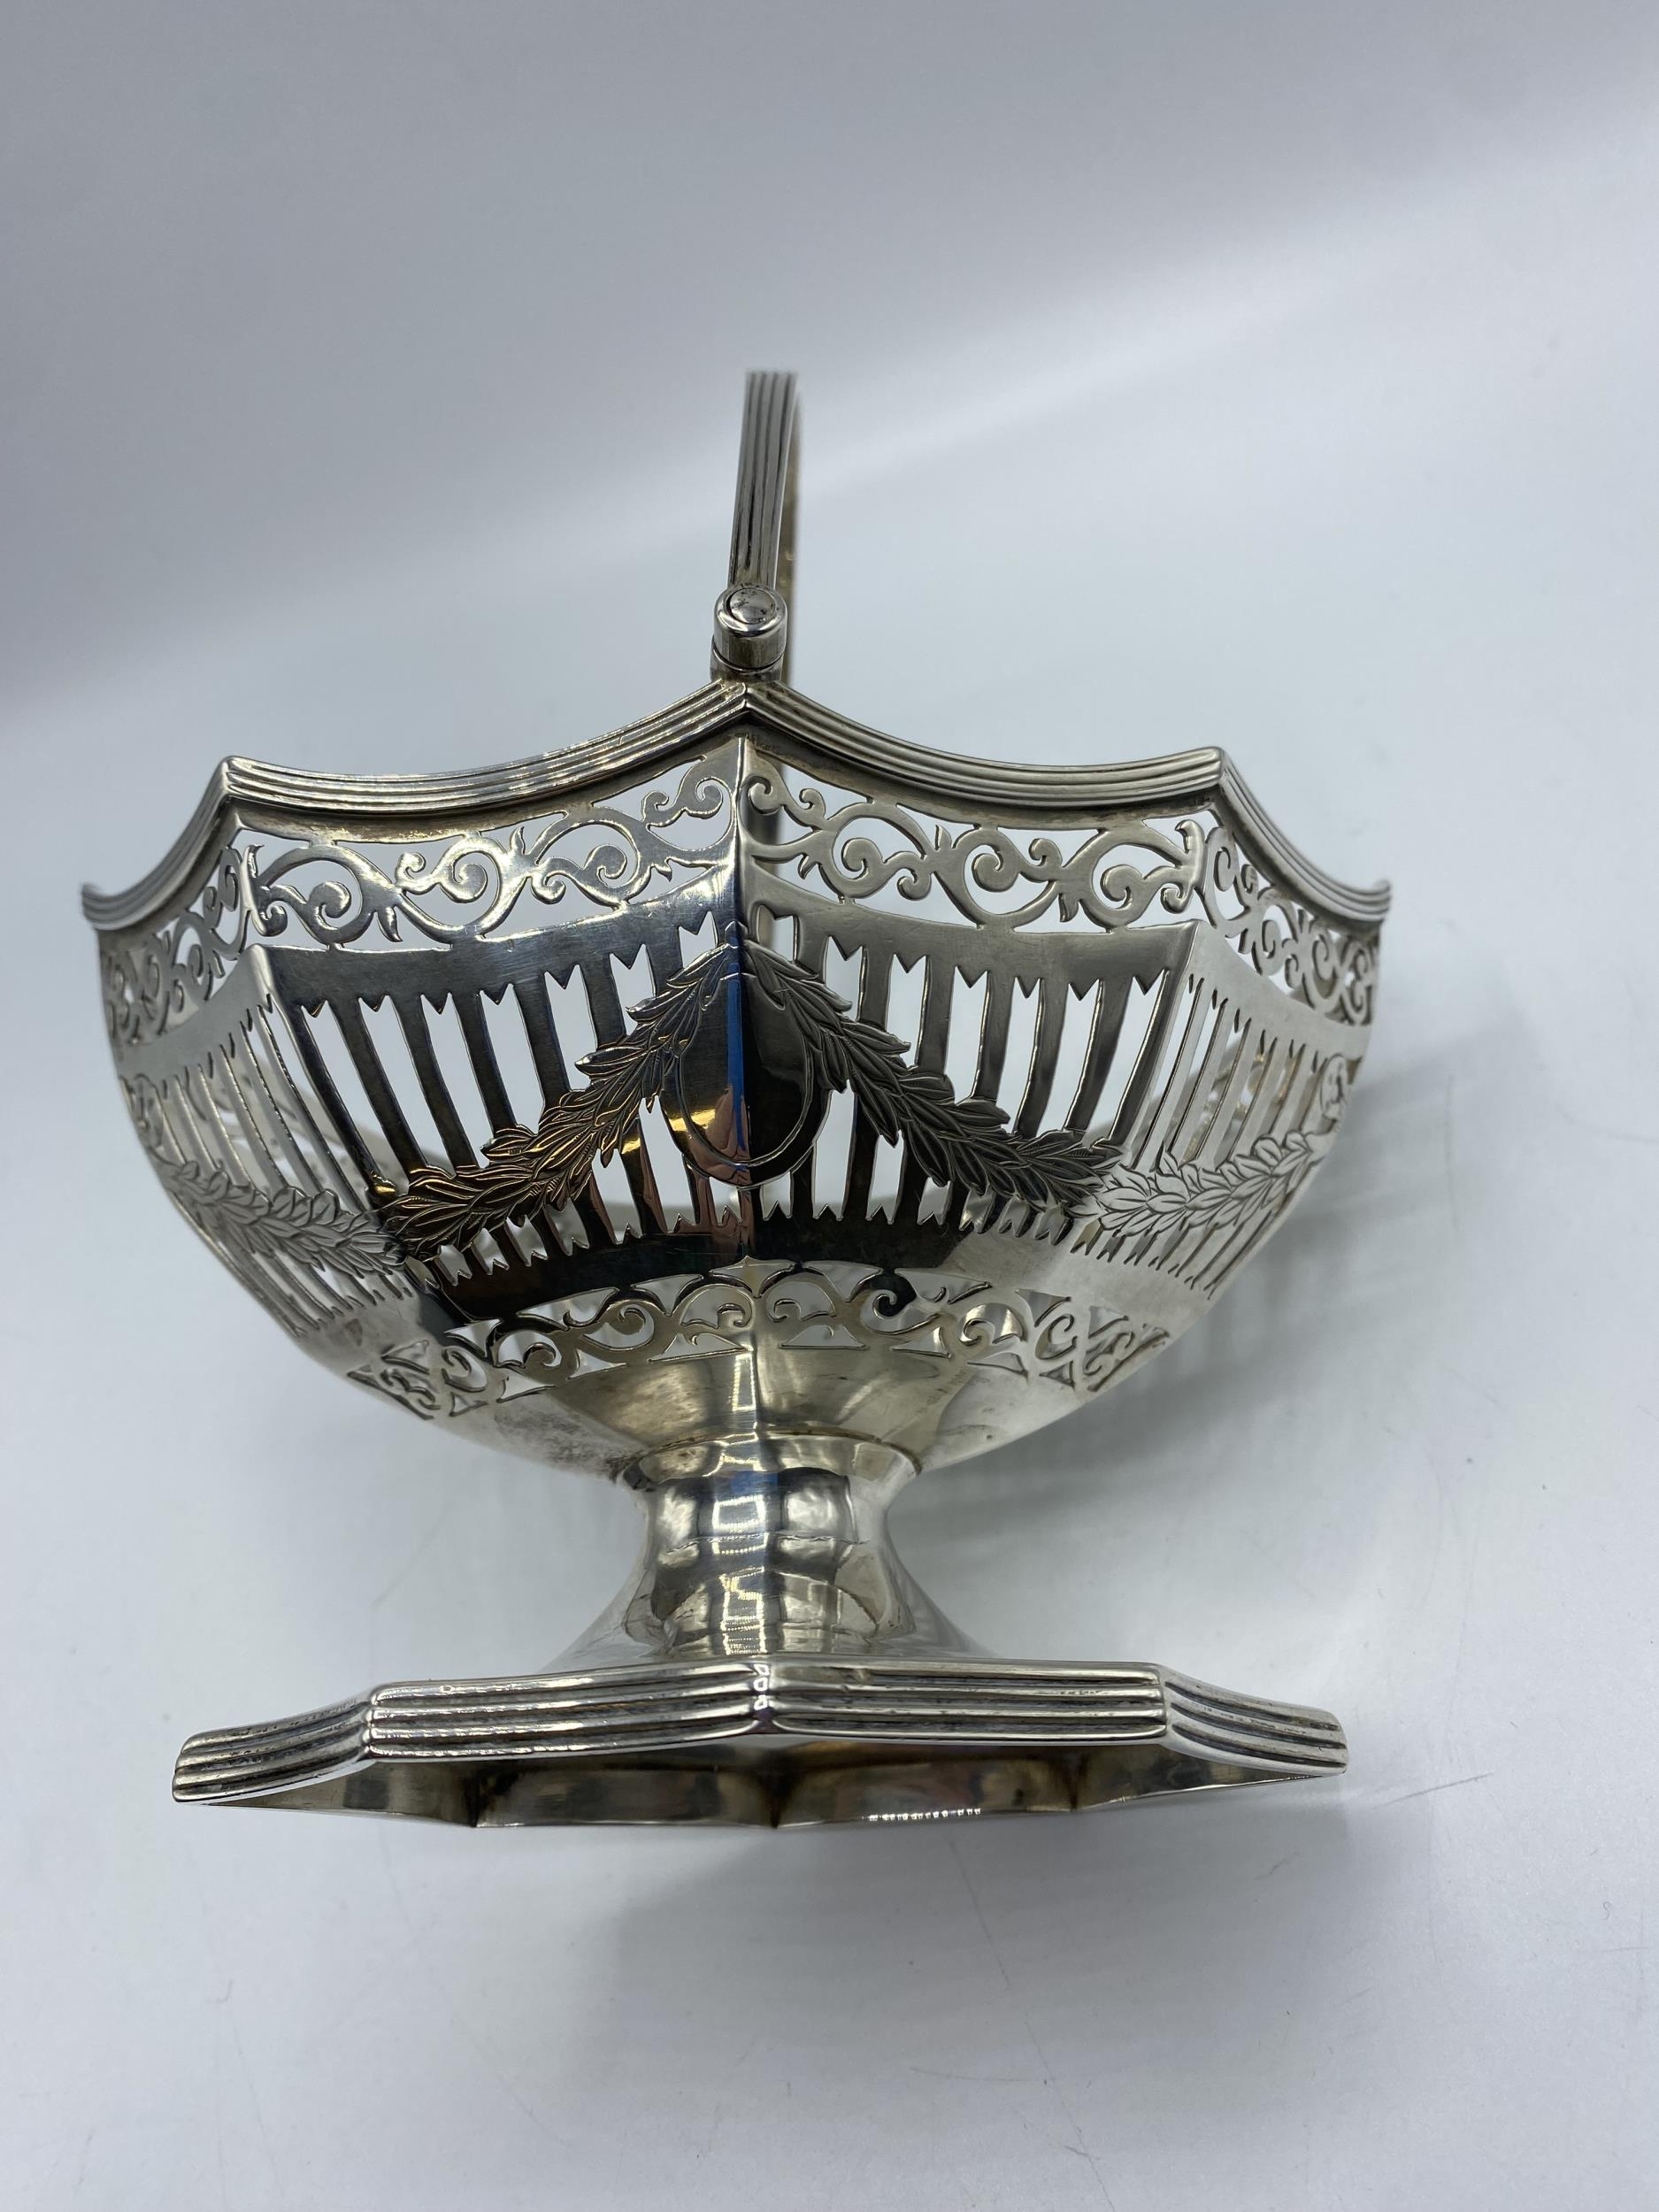 A sterling silver octagonal pierced Bonbon dish with swing handle, by Haseler and Bill, London - Image 2 of 4